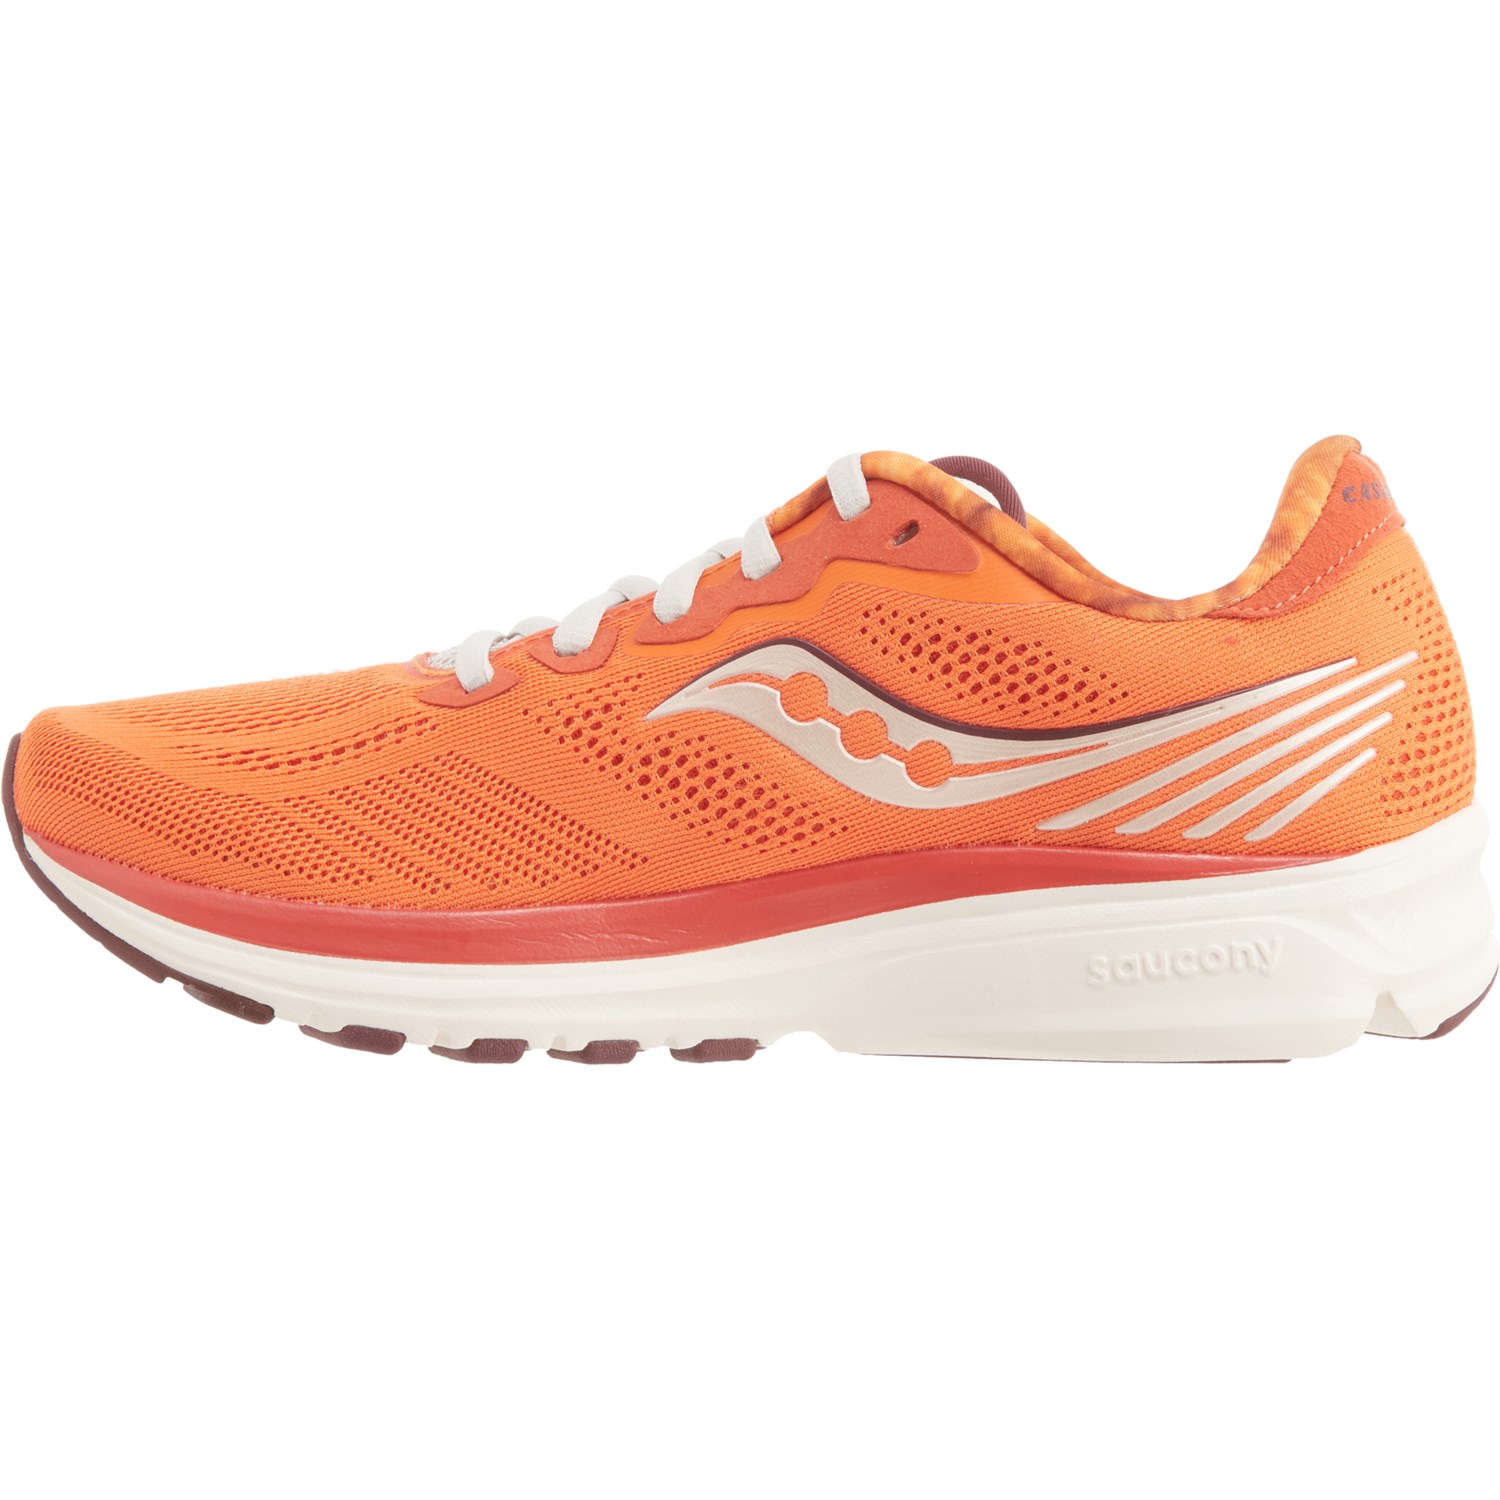 Saucony Ride 14 Sneakers (For Women) - Save 65%